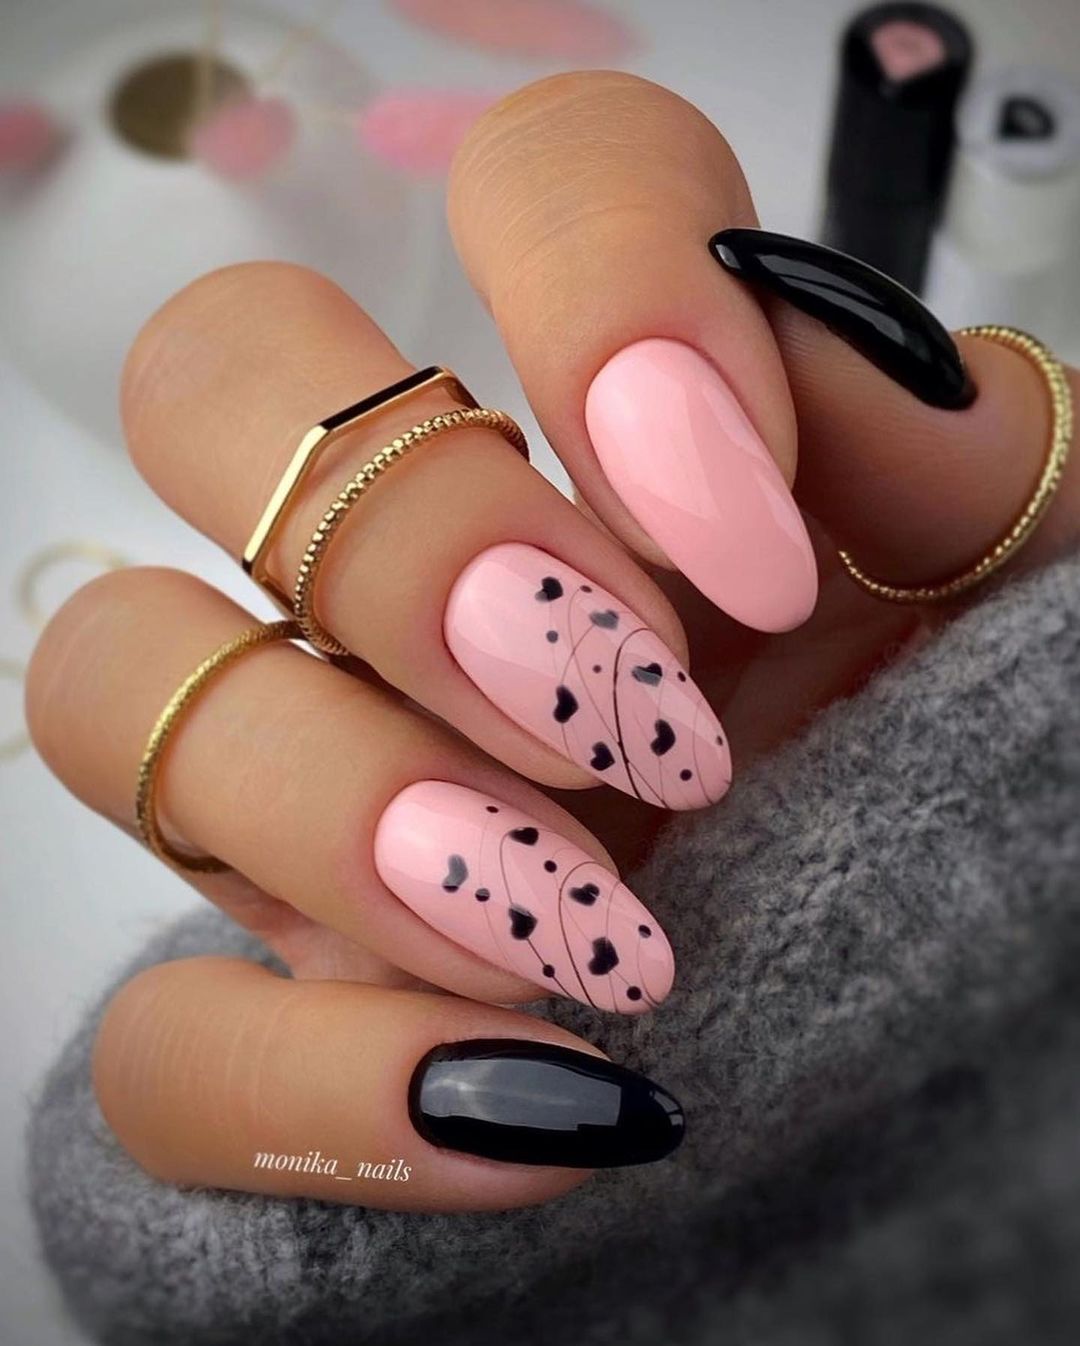 50+ Fall Nail Ideas You’re Going To Obsess Over images 18